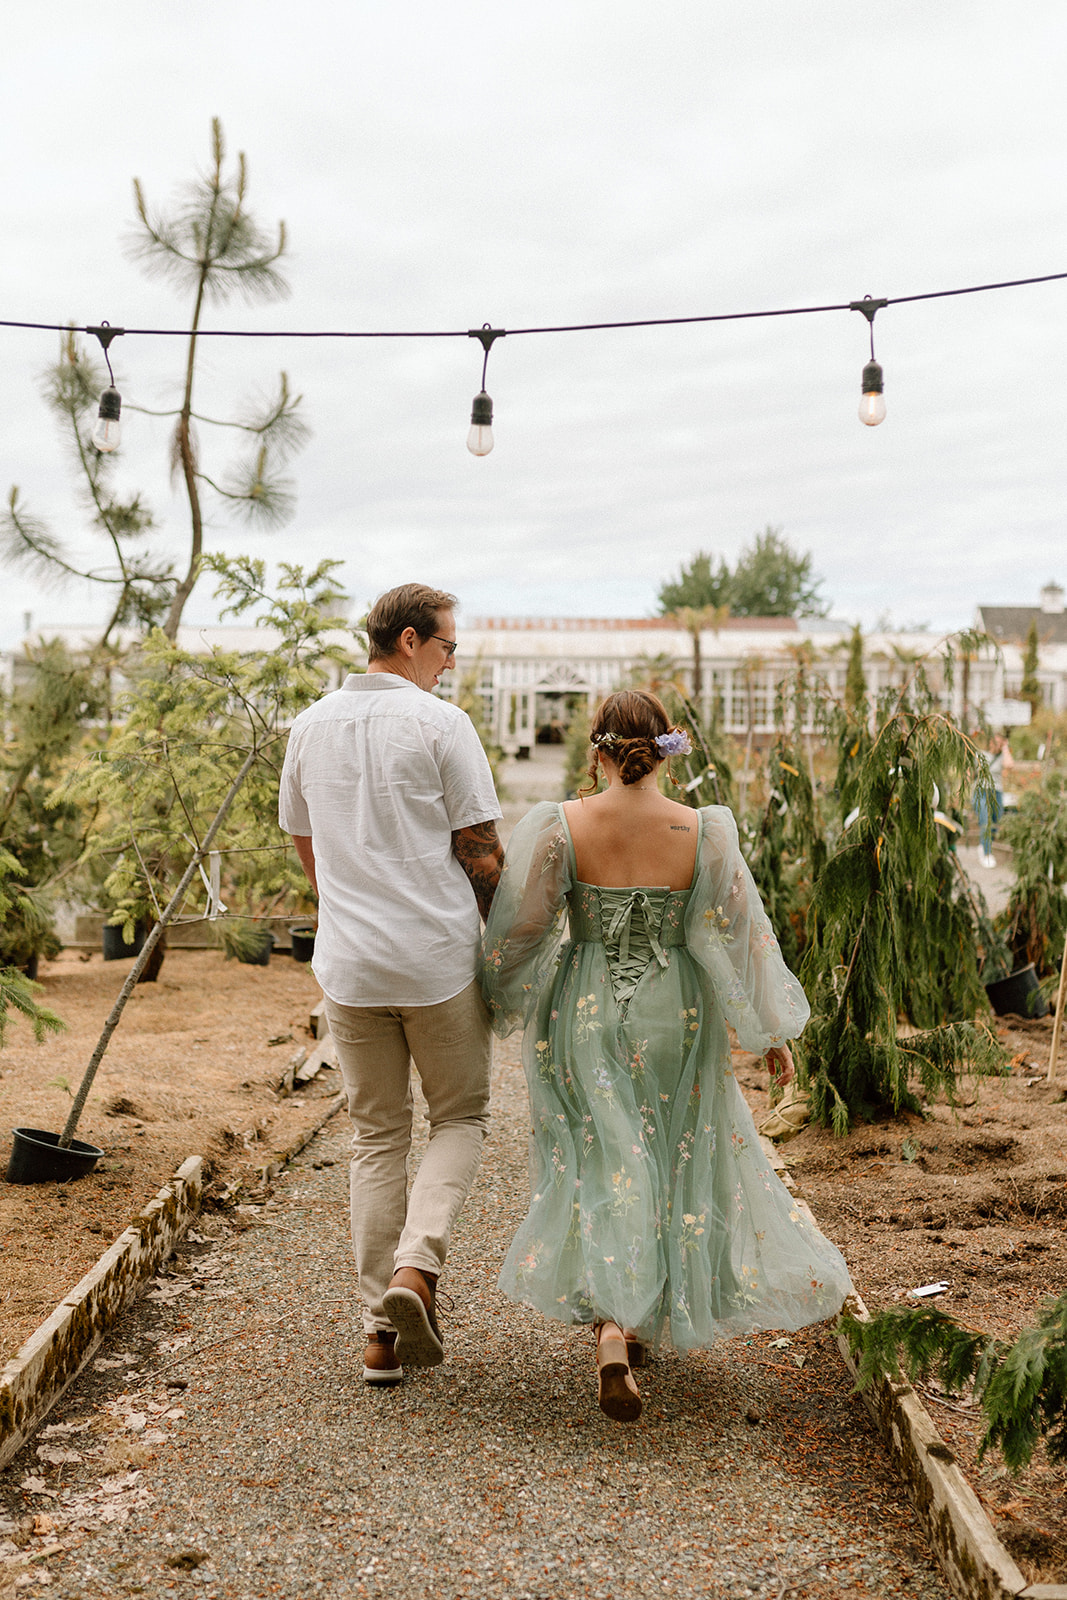 Beautiful bride and groom during their outdoor wedding day with colrful wedding decor and unique wedding reception location